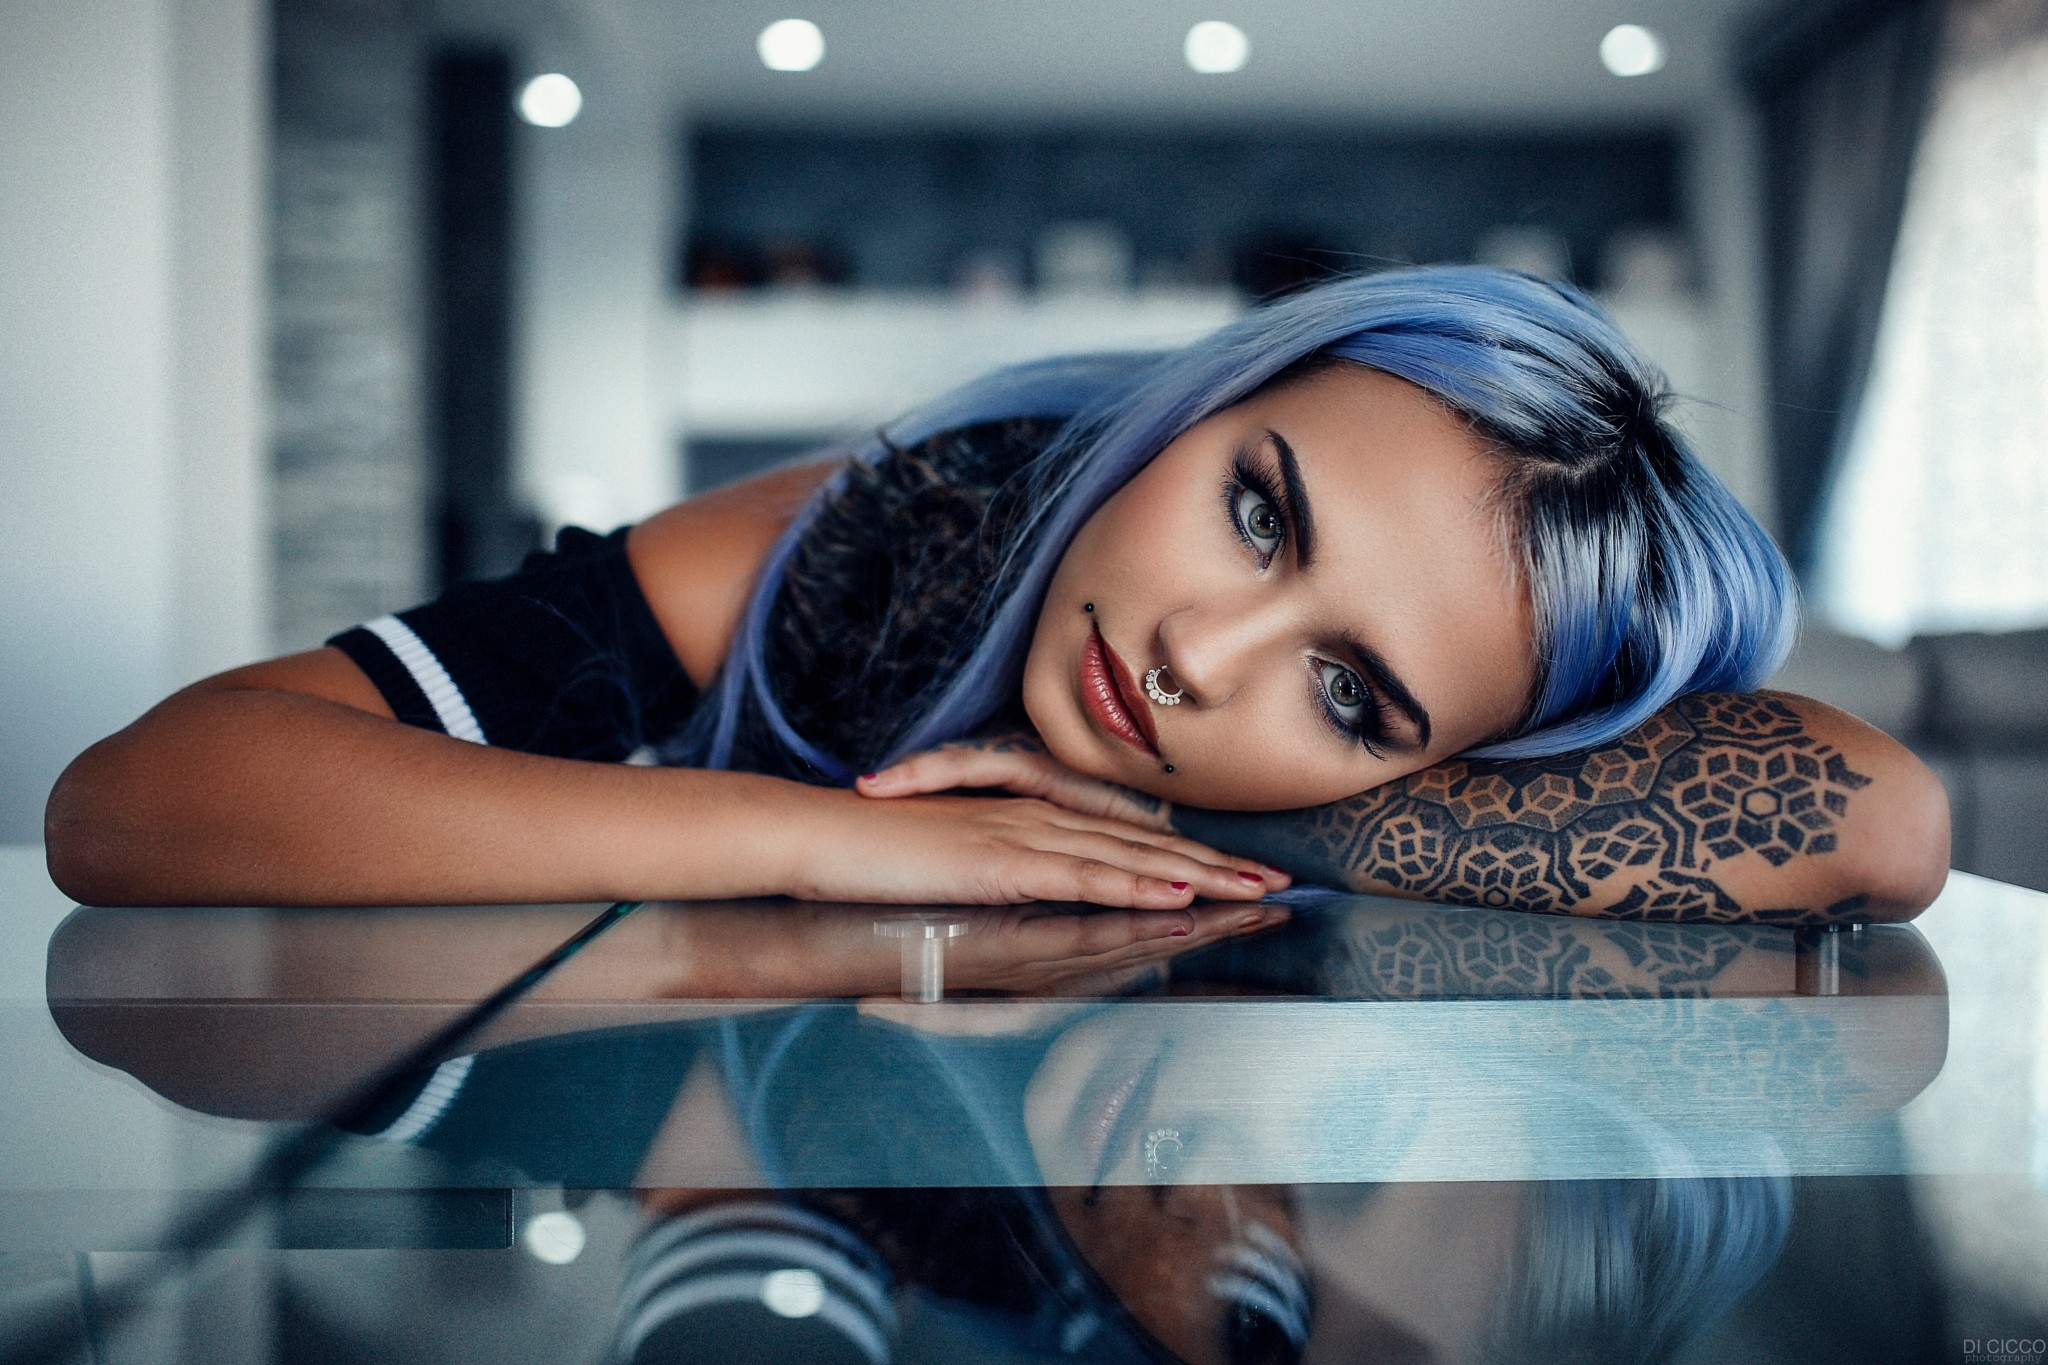 People 2048x1365 women portrait tanned tattoo glass table Fishball Suicide Alessandro Di Cicco watermarked